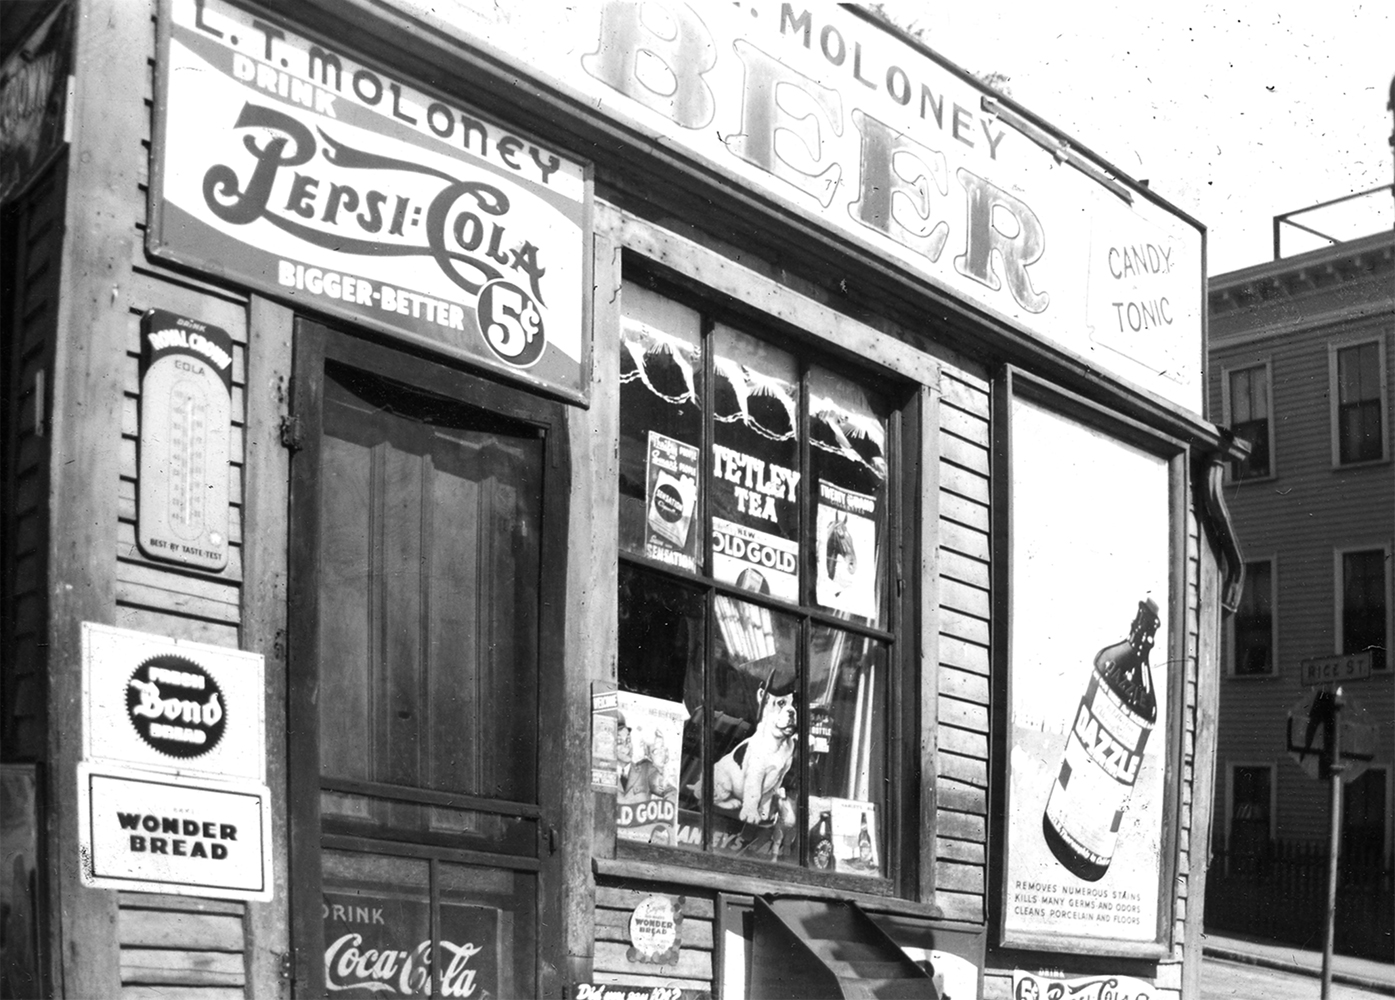 232 Cypress St., Lawrence Moloney Package Store, 1941